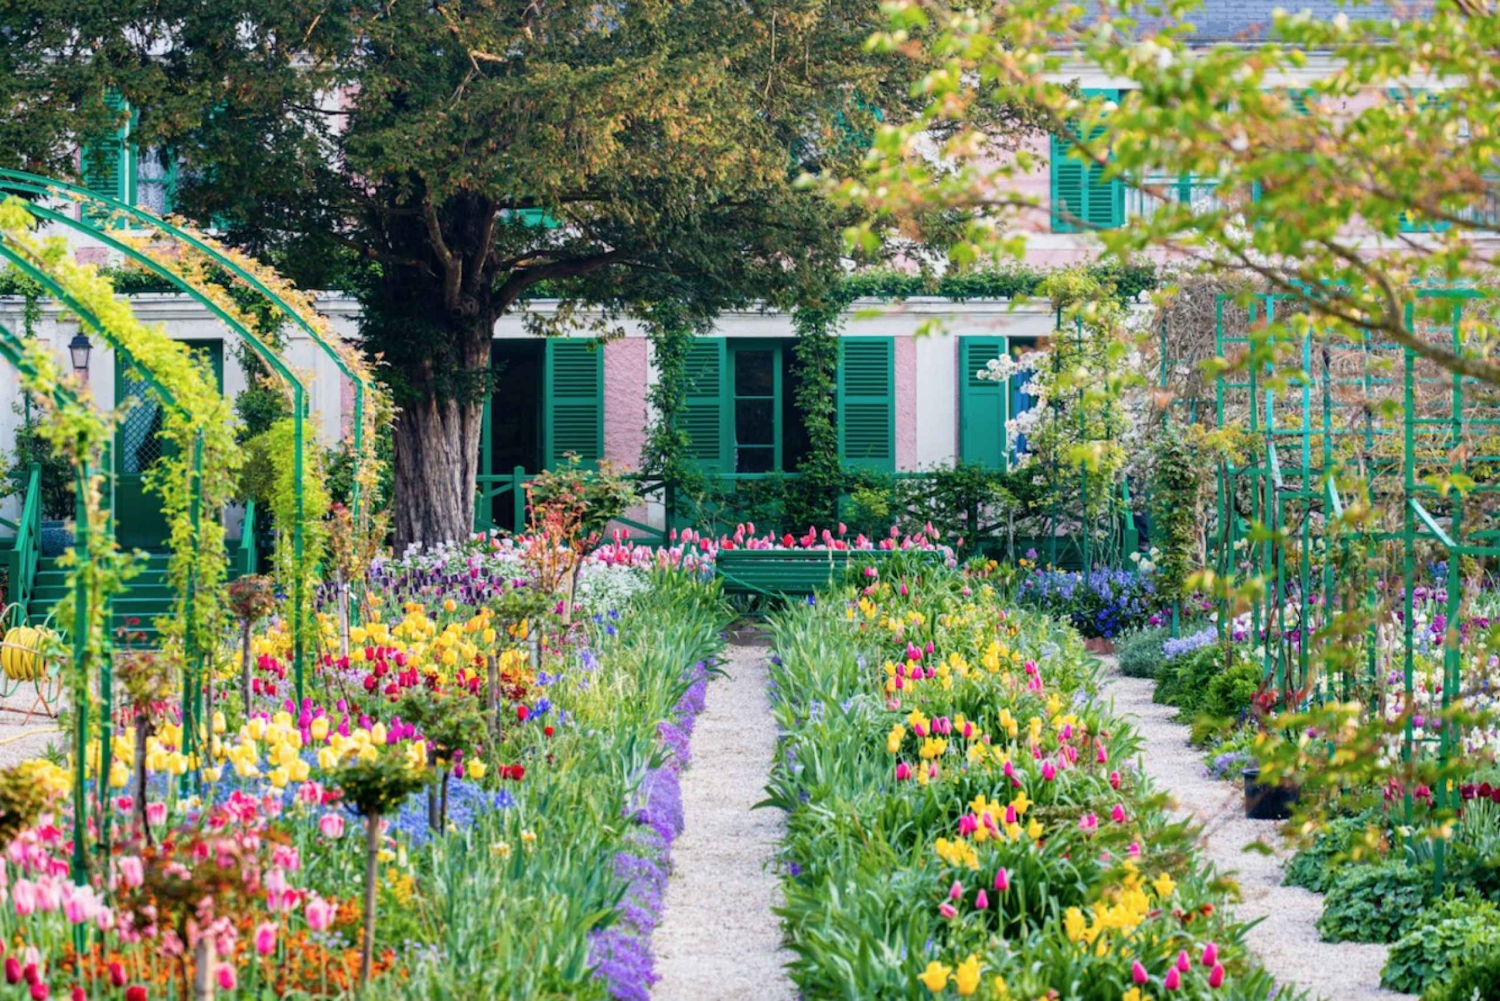 From Paris: Private Trip to Giverny, Monet's House & Museum